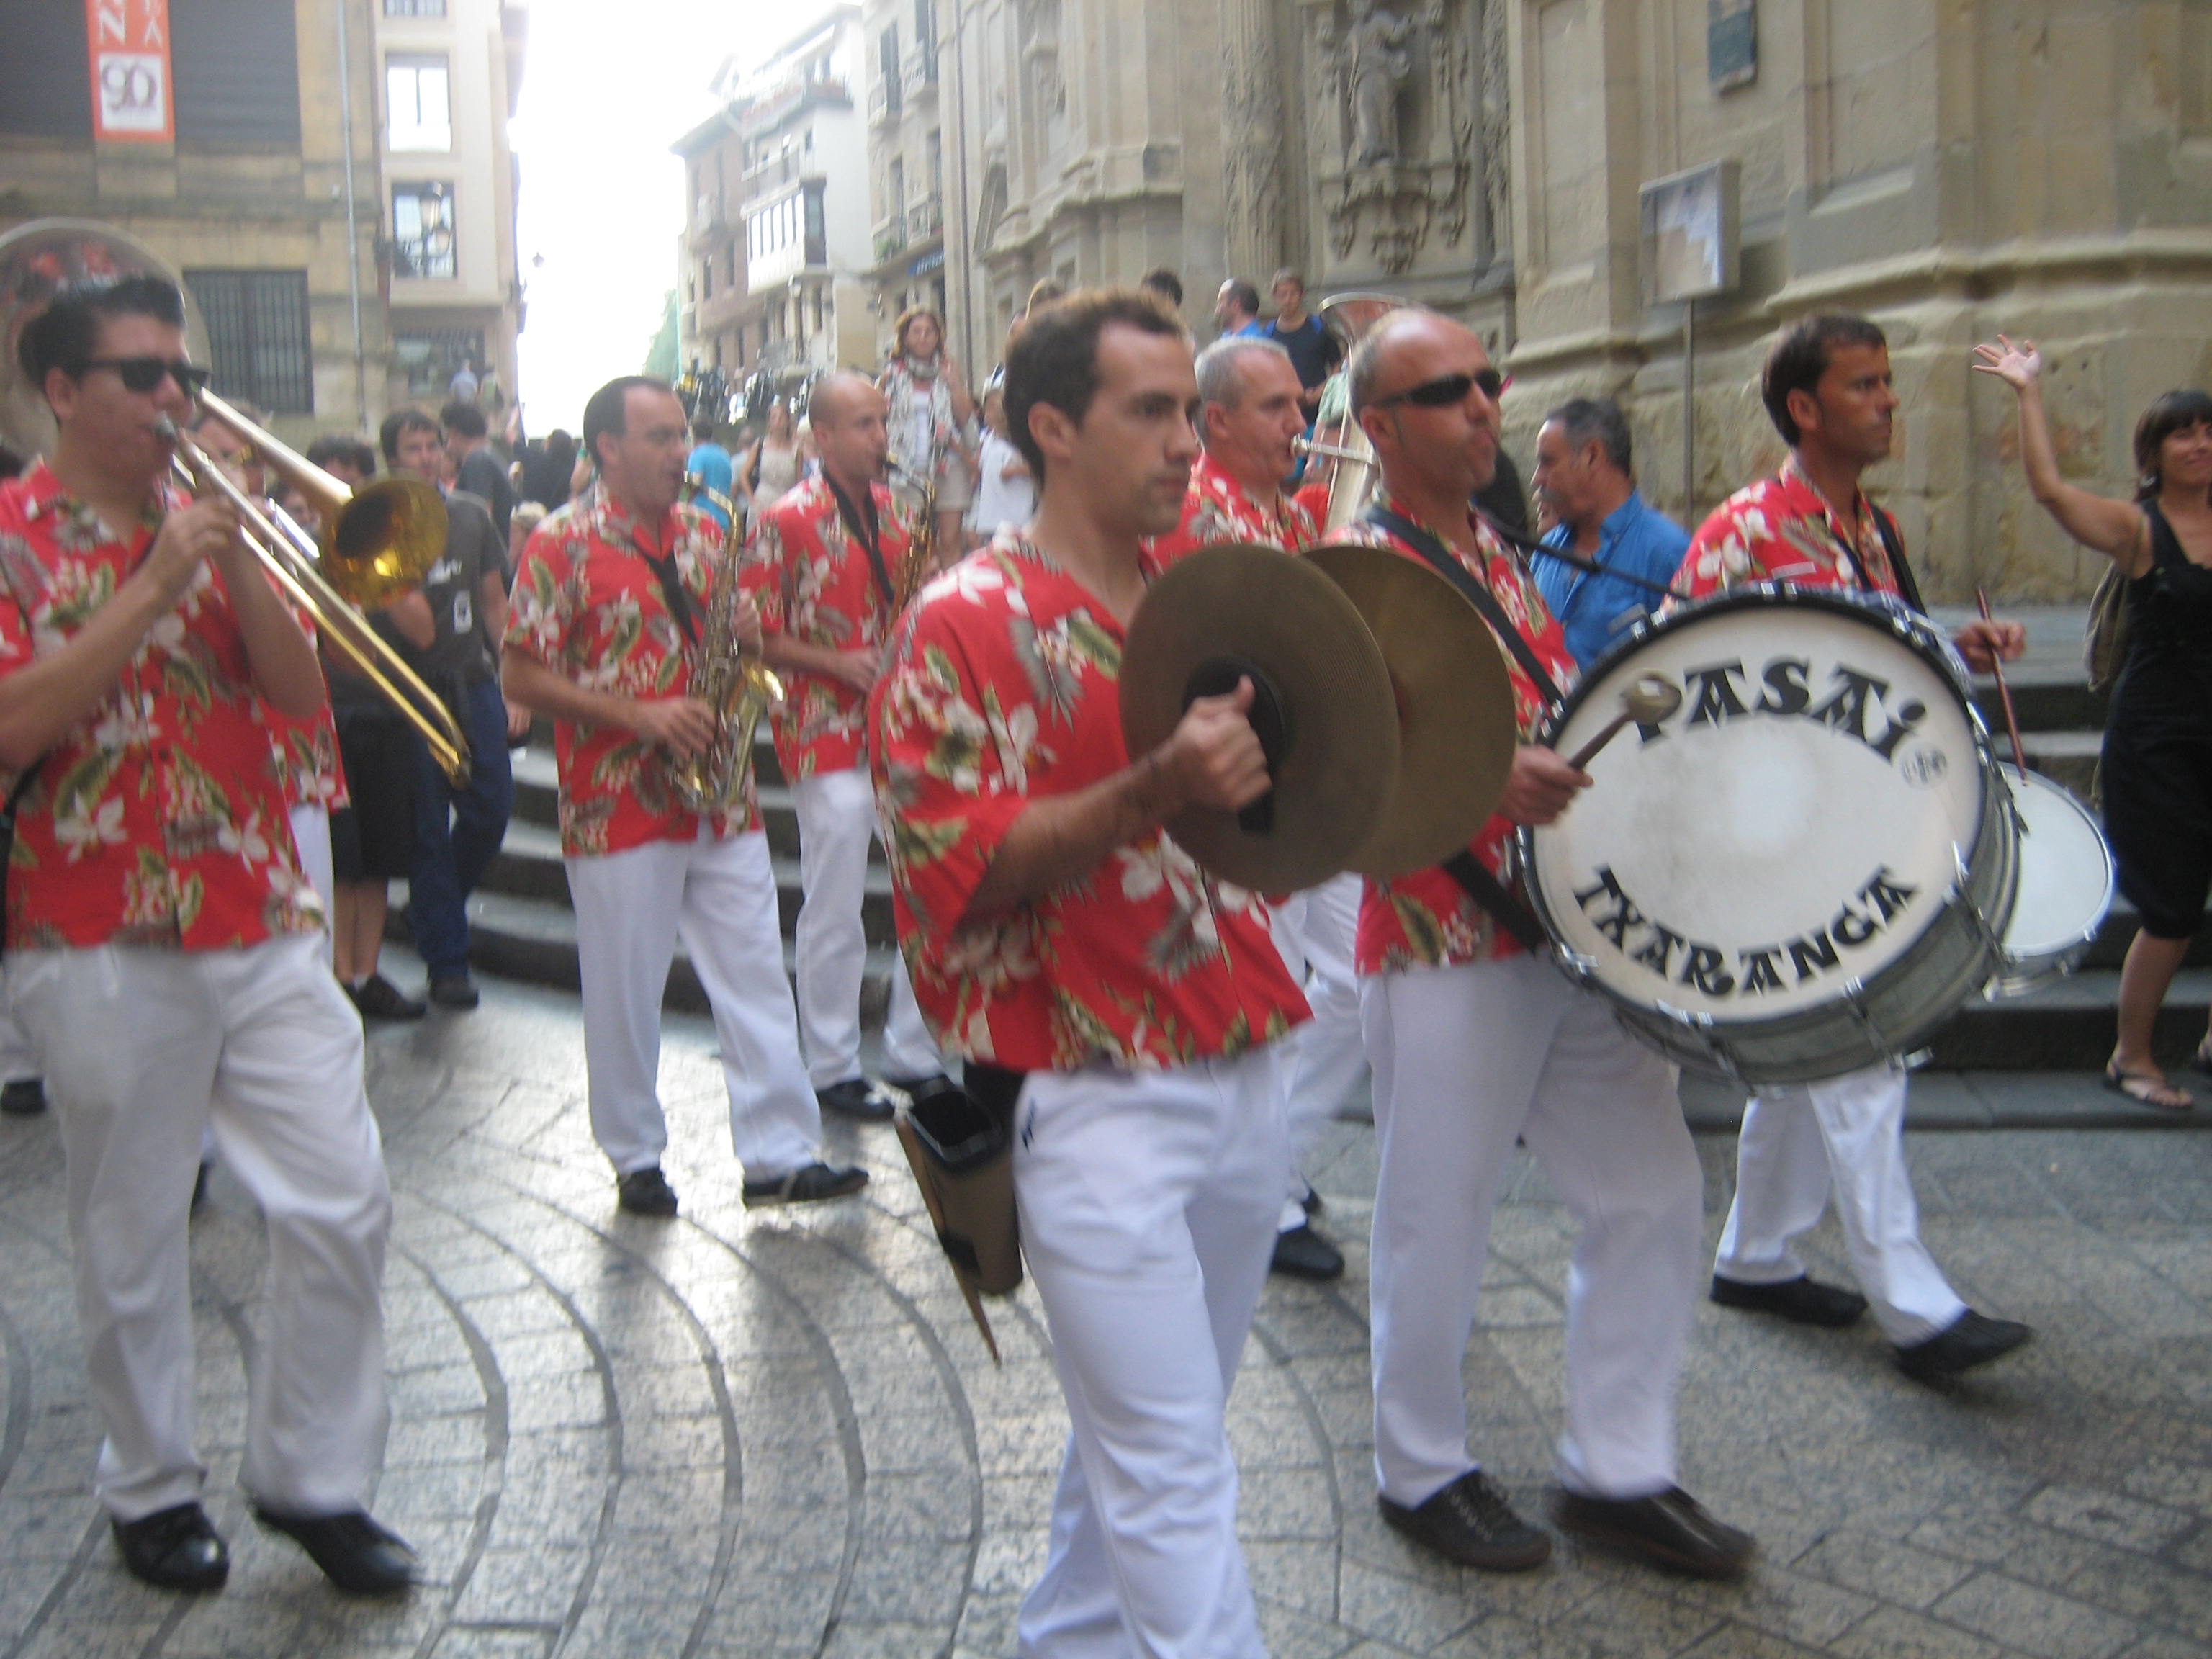 Basque band playing in the streets of San Sebastian during a summer festival